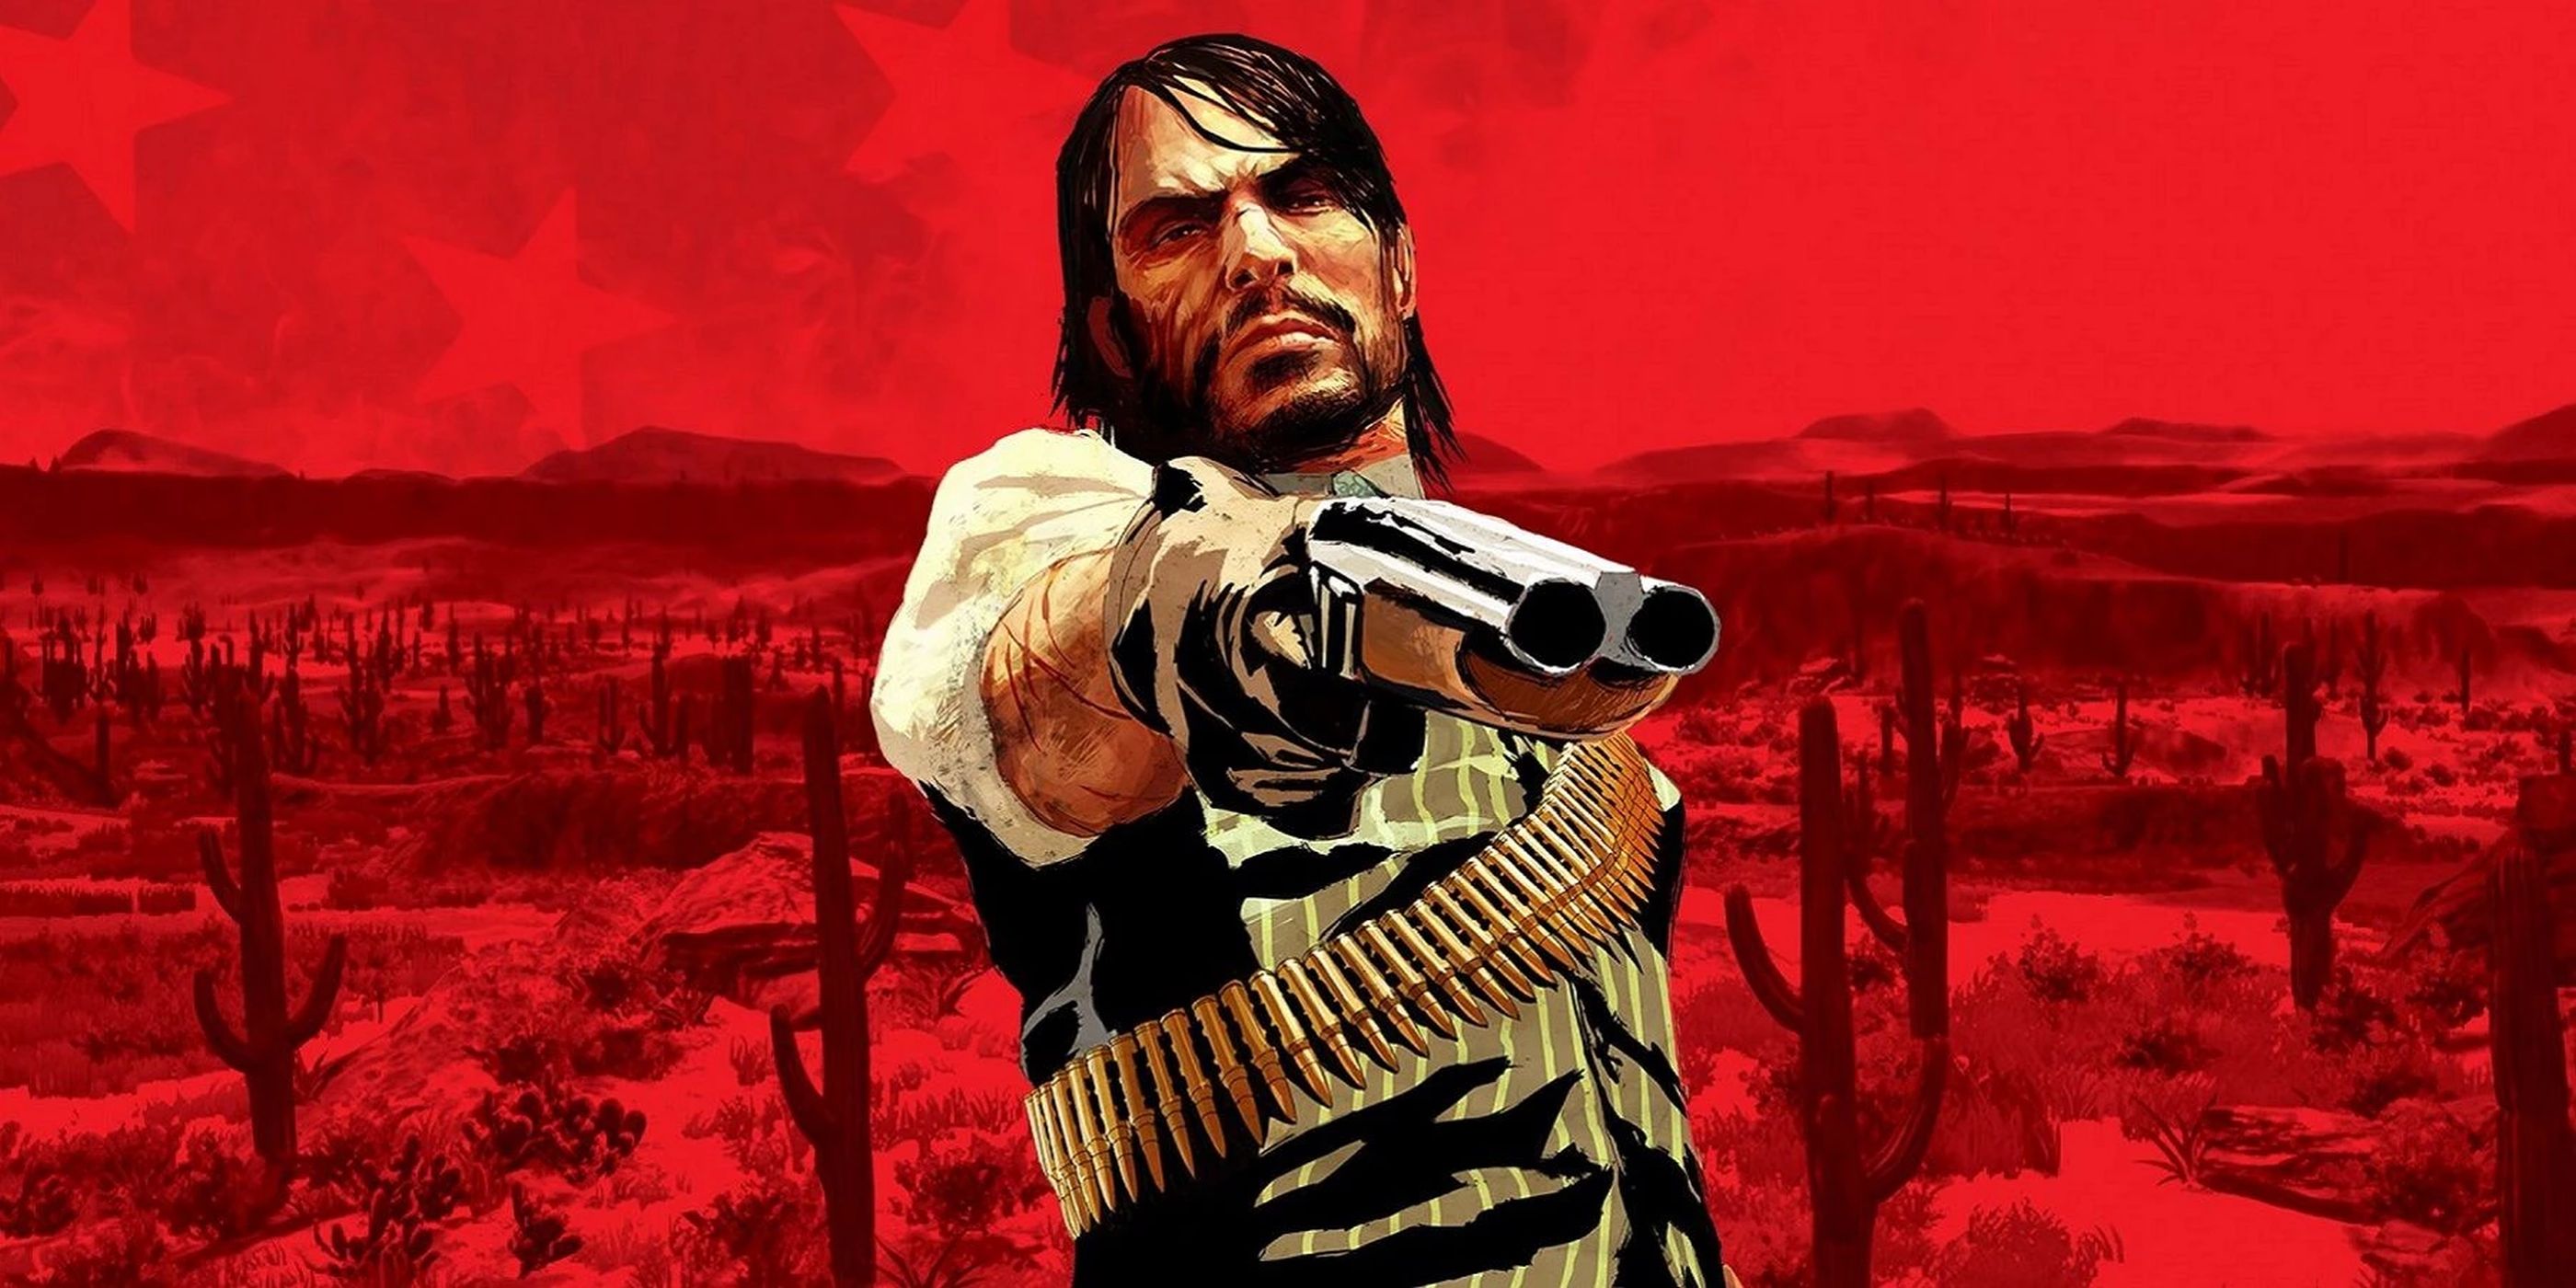 Image for GTA 4 and Red Dead Redemption remasters were in the works at one time but are off the table for now